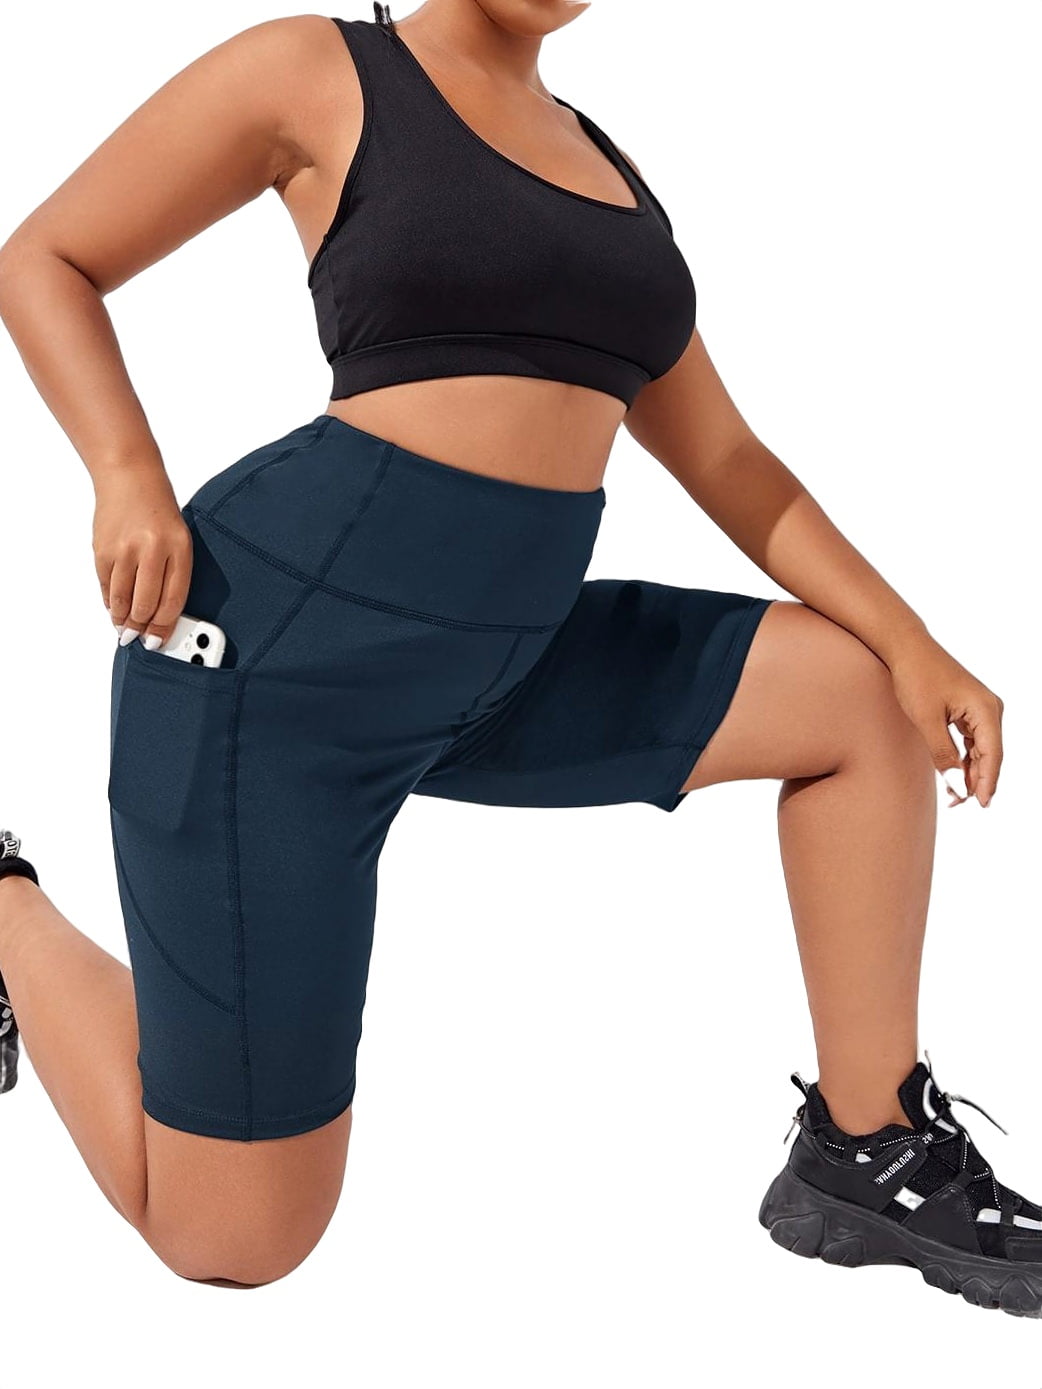 Plus Size Tummy Control Cycling Shorts for Women Casual High Waist Yoga Bike  Shorts Sport Fitness Athletic Active Pants Tights Half Pants 